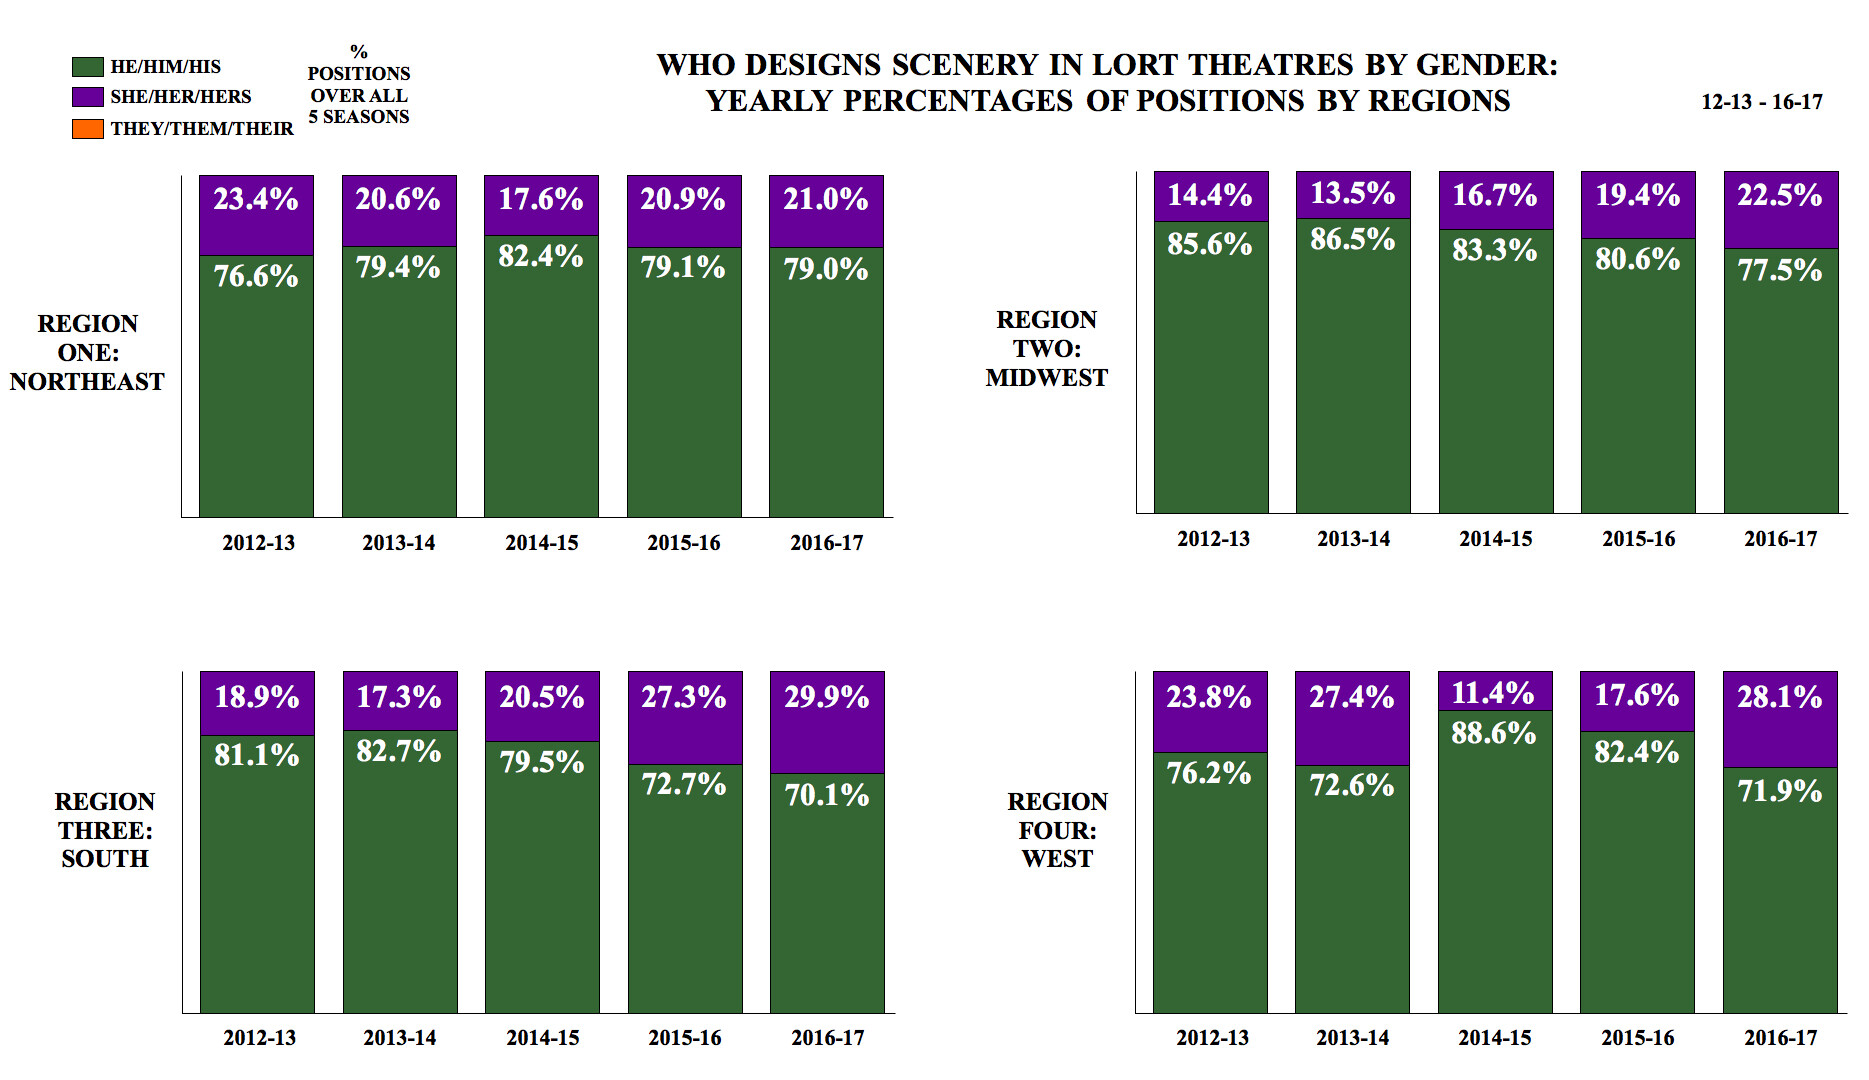 Who Designs Scenery in LORT Theatres by Gender: Yearly Percentages of Positions by Regions